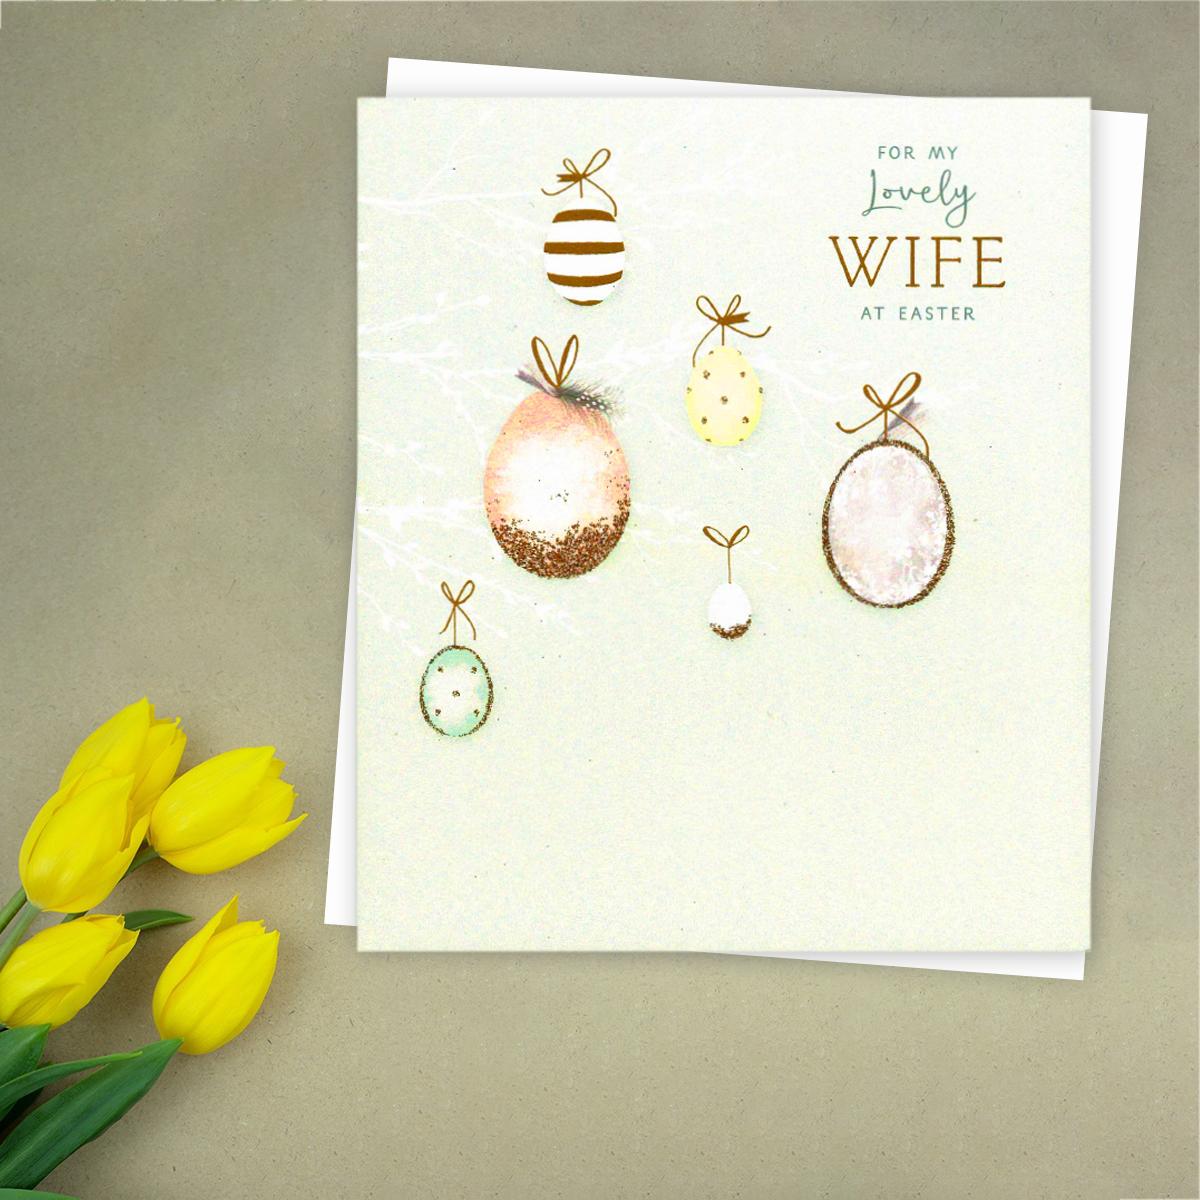 ' For My Lovely Wife At Easter' Card Featuring Multiple Eggs With Gold Foil Detail And White Envelope